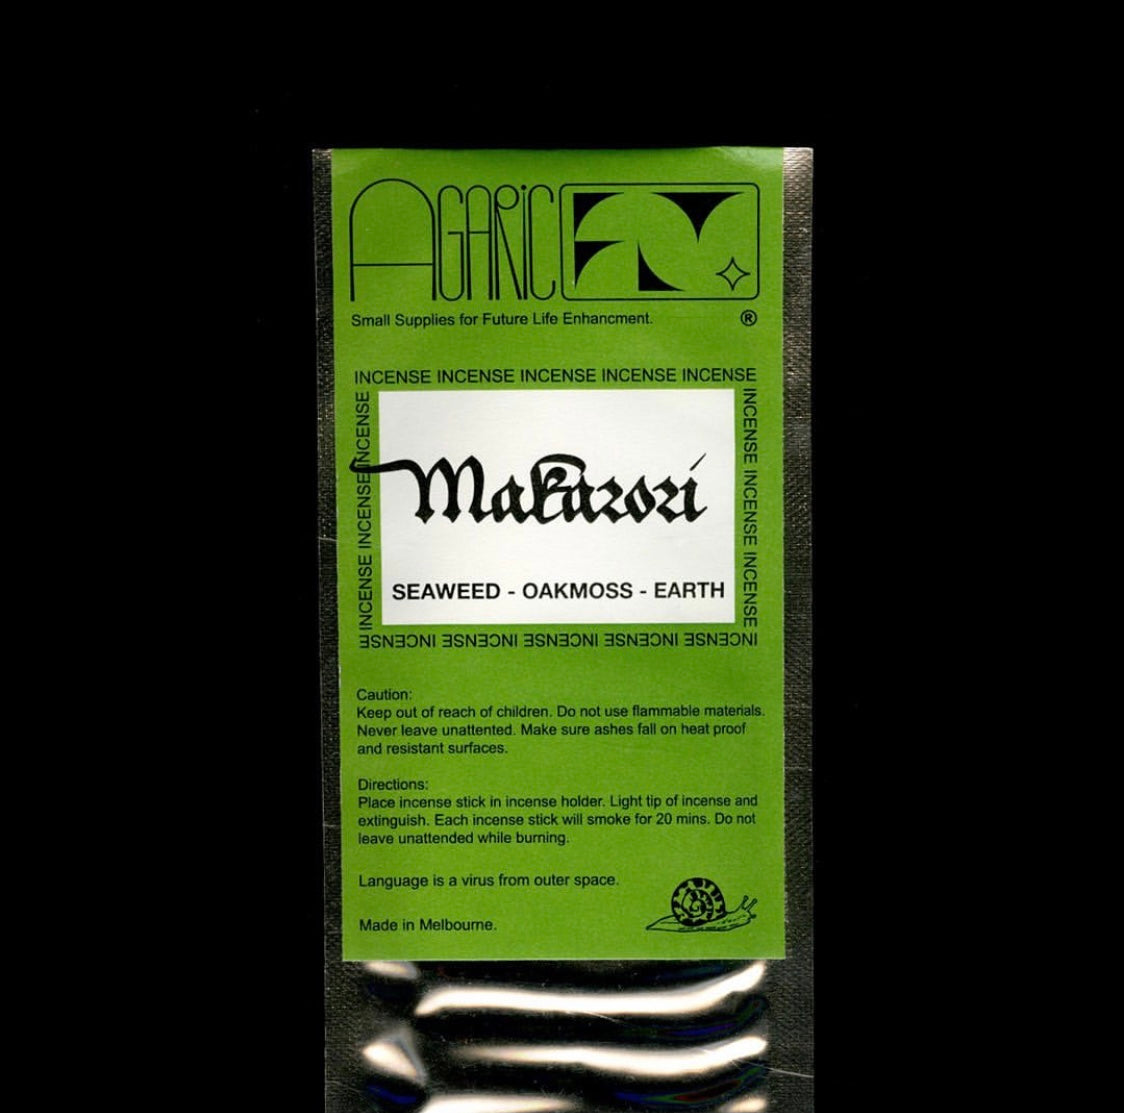 SOLD OUT – Agaric Fly Makarori Incense